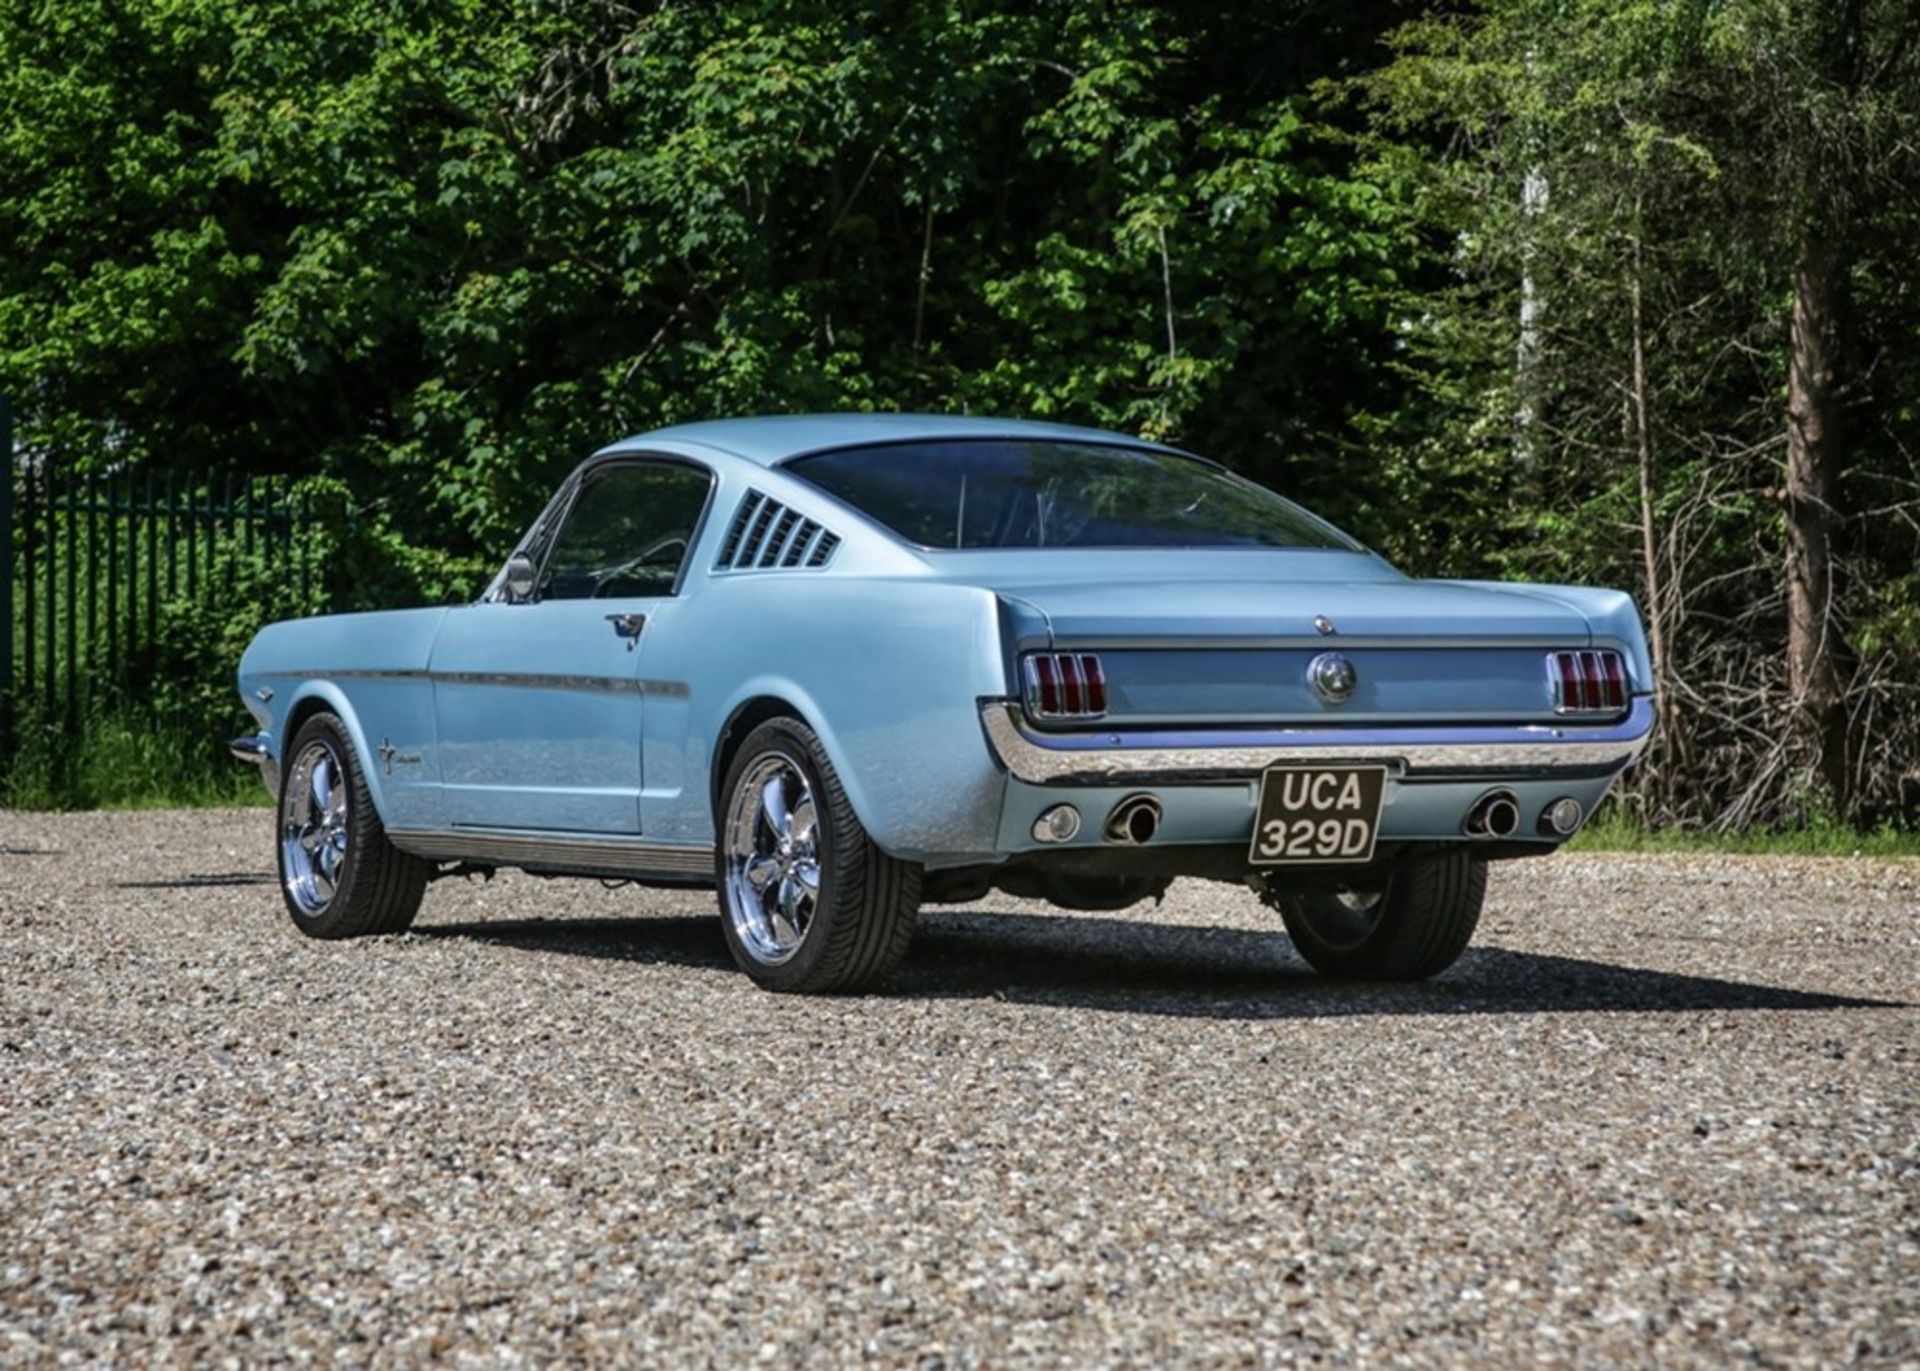 1966 Ford Mustang Fastback - Image 9 of 9